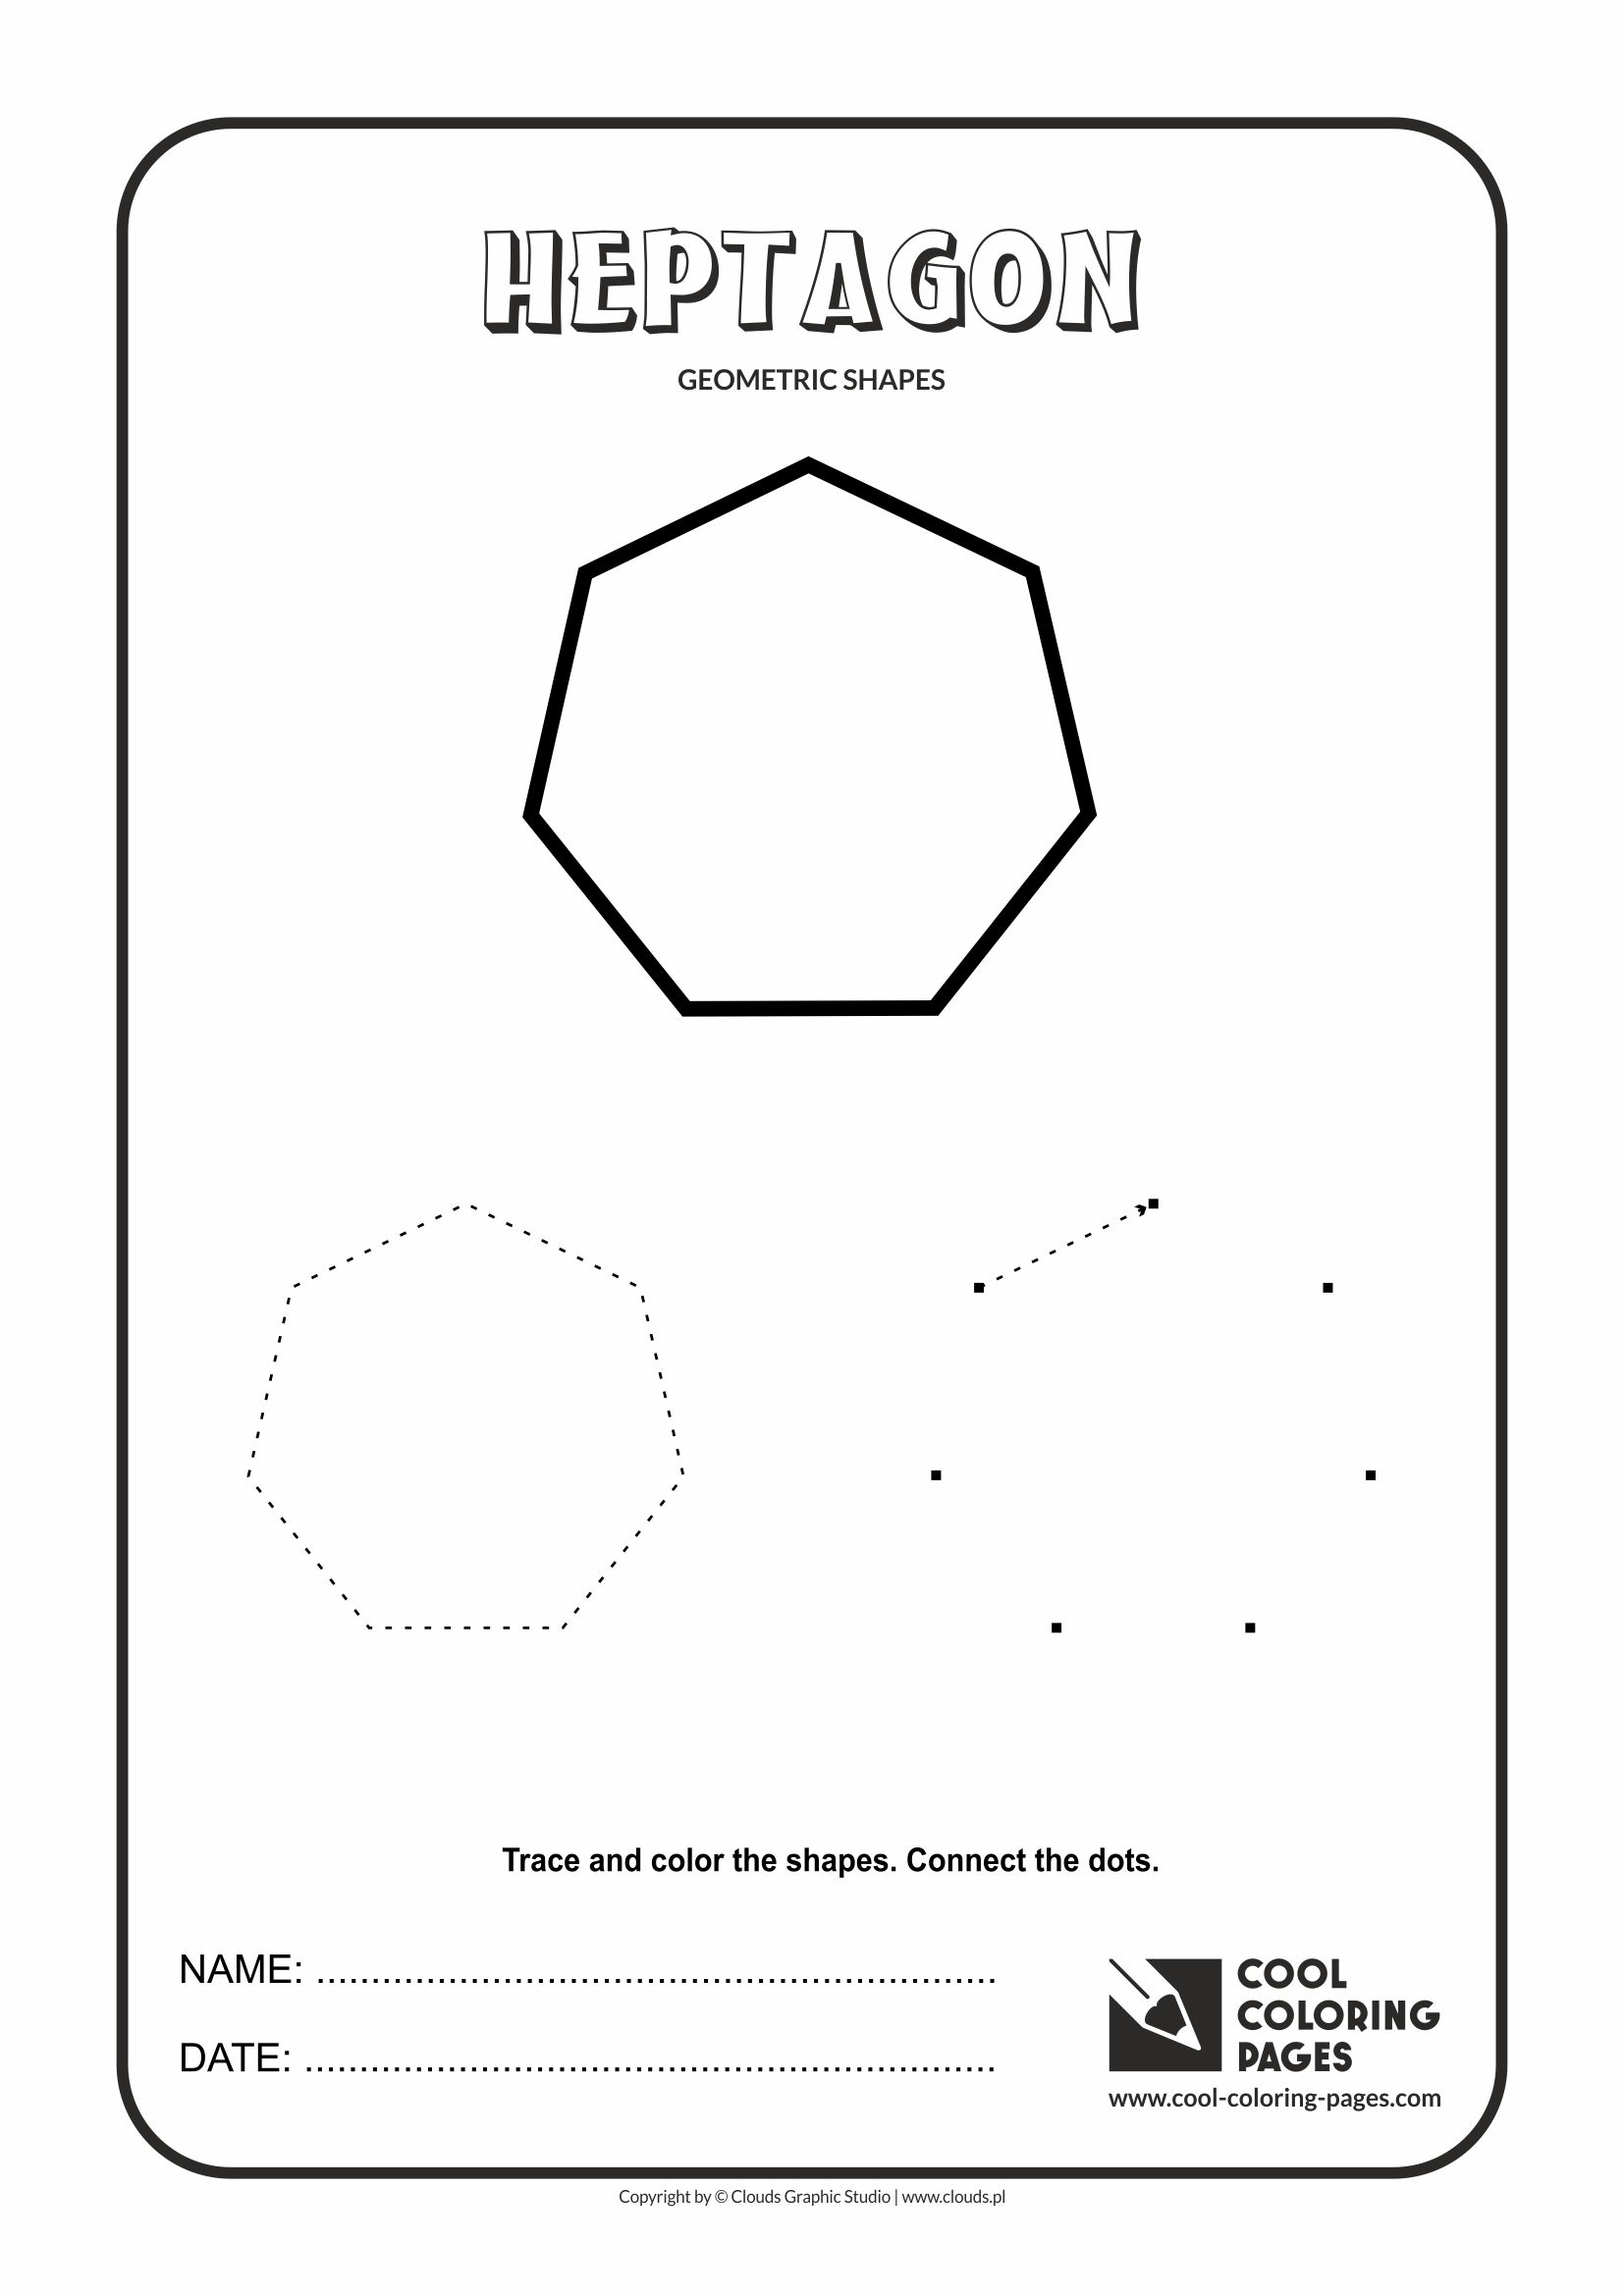 Cool Coloring Pages - Geometric shapes / Heptagon